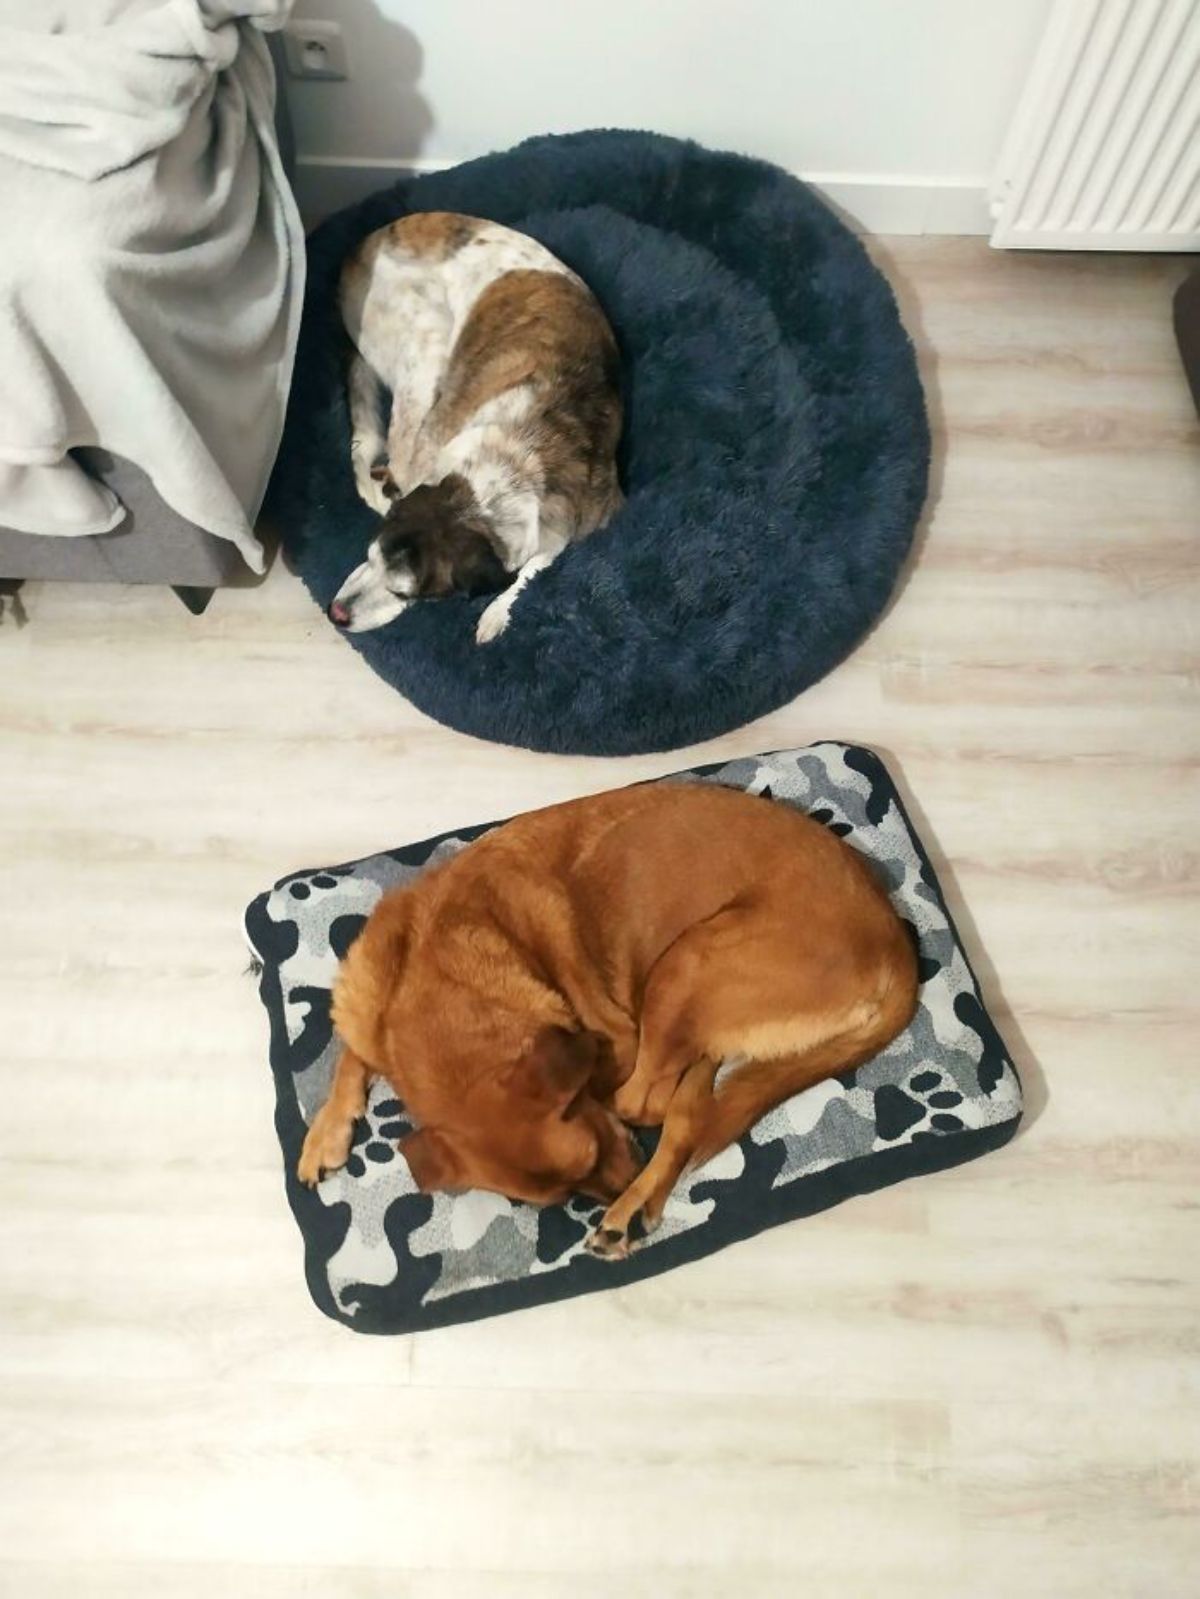 brown dog laying on a black white and grey dog bed and brow black and white dog sleeping on a dark blue dog bed